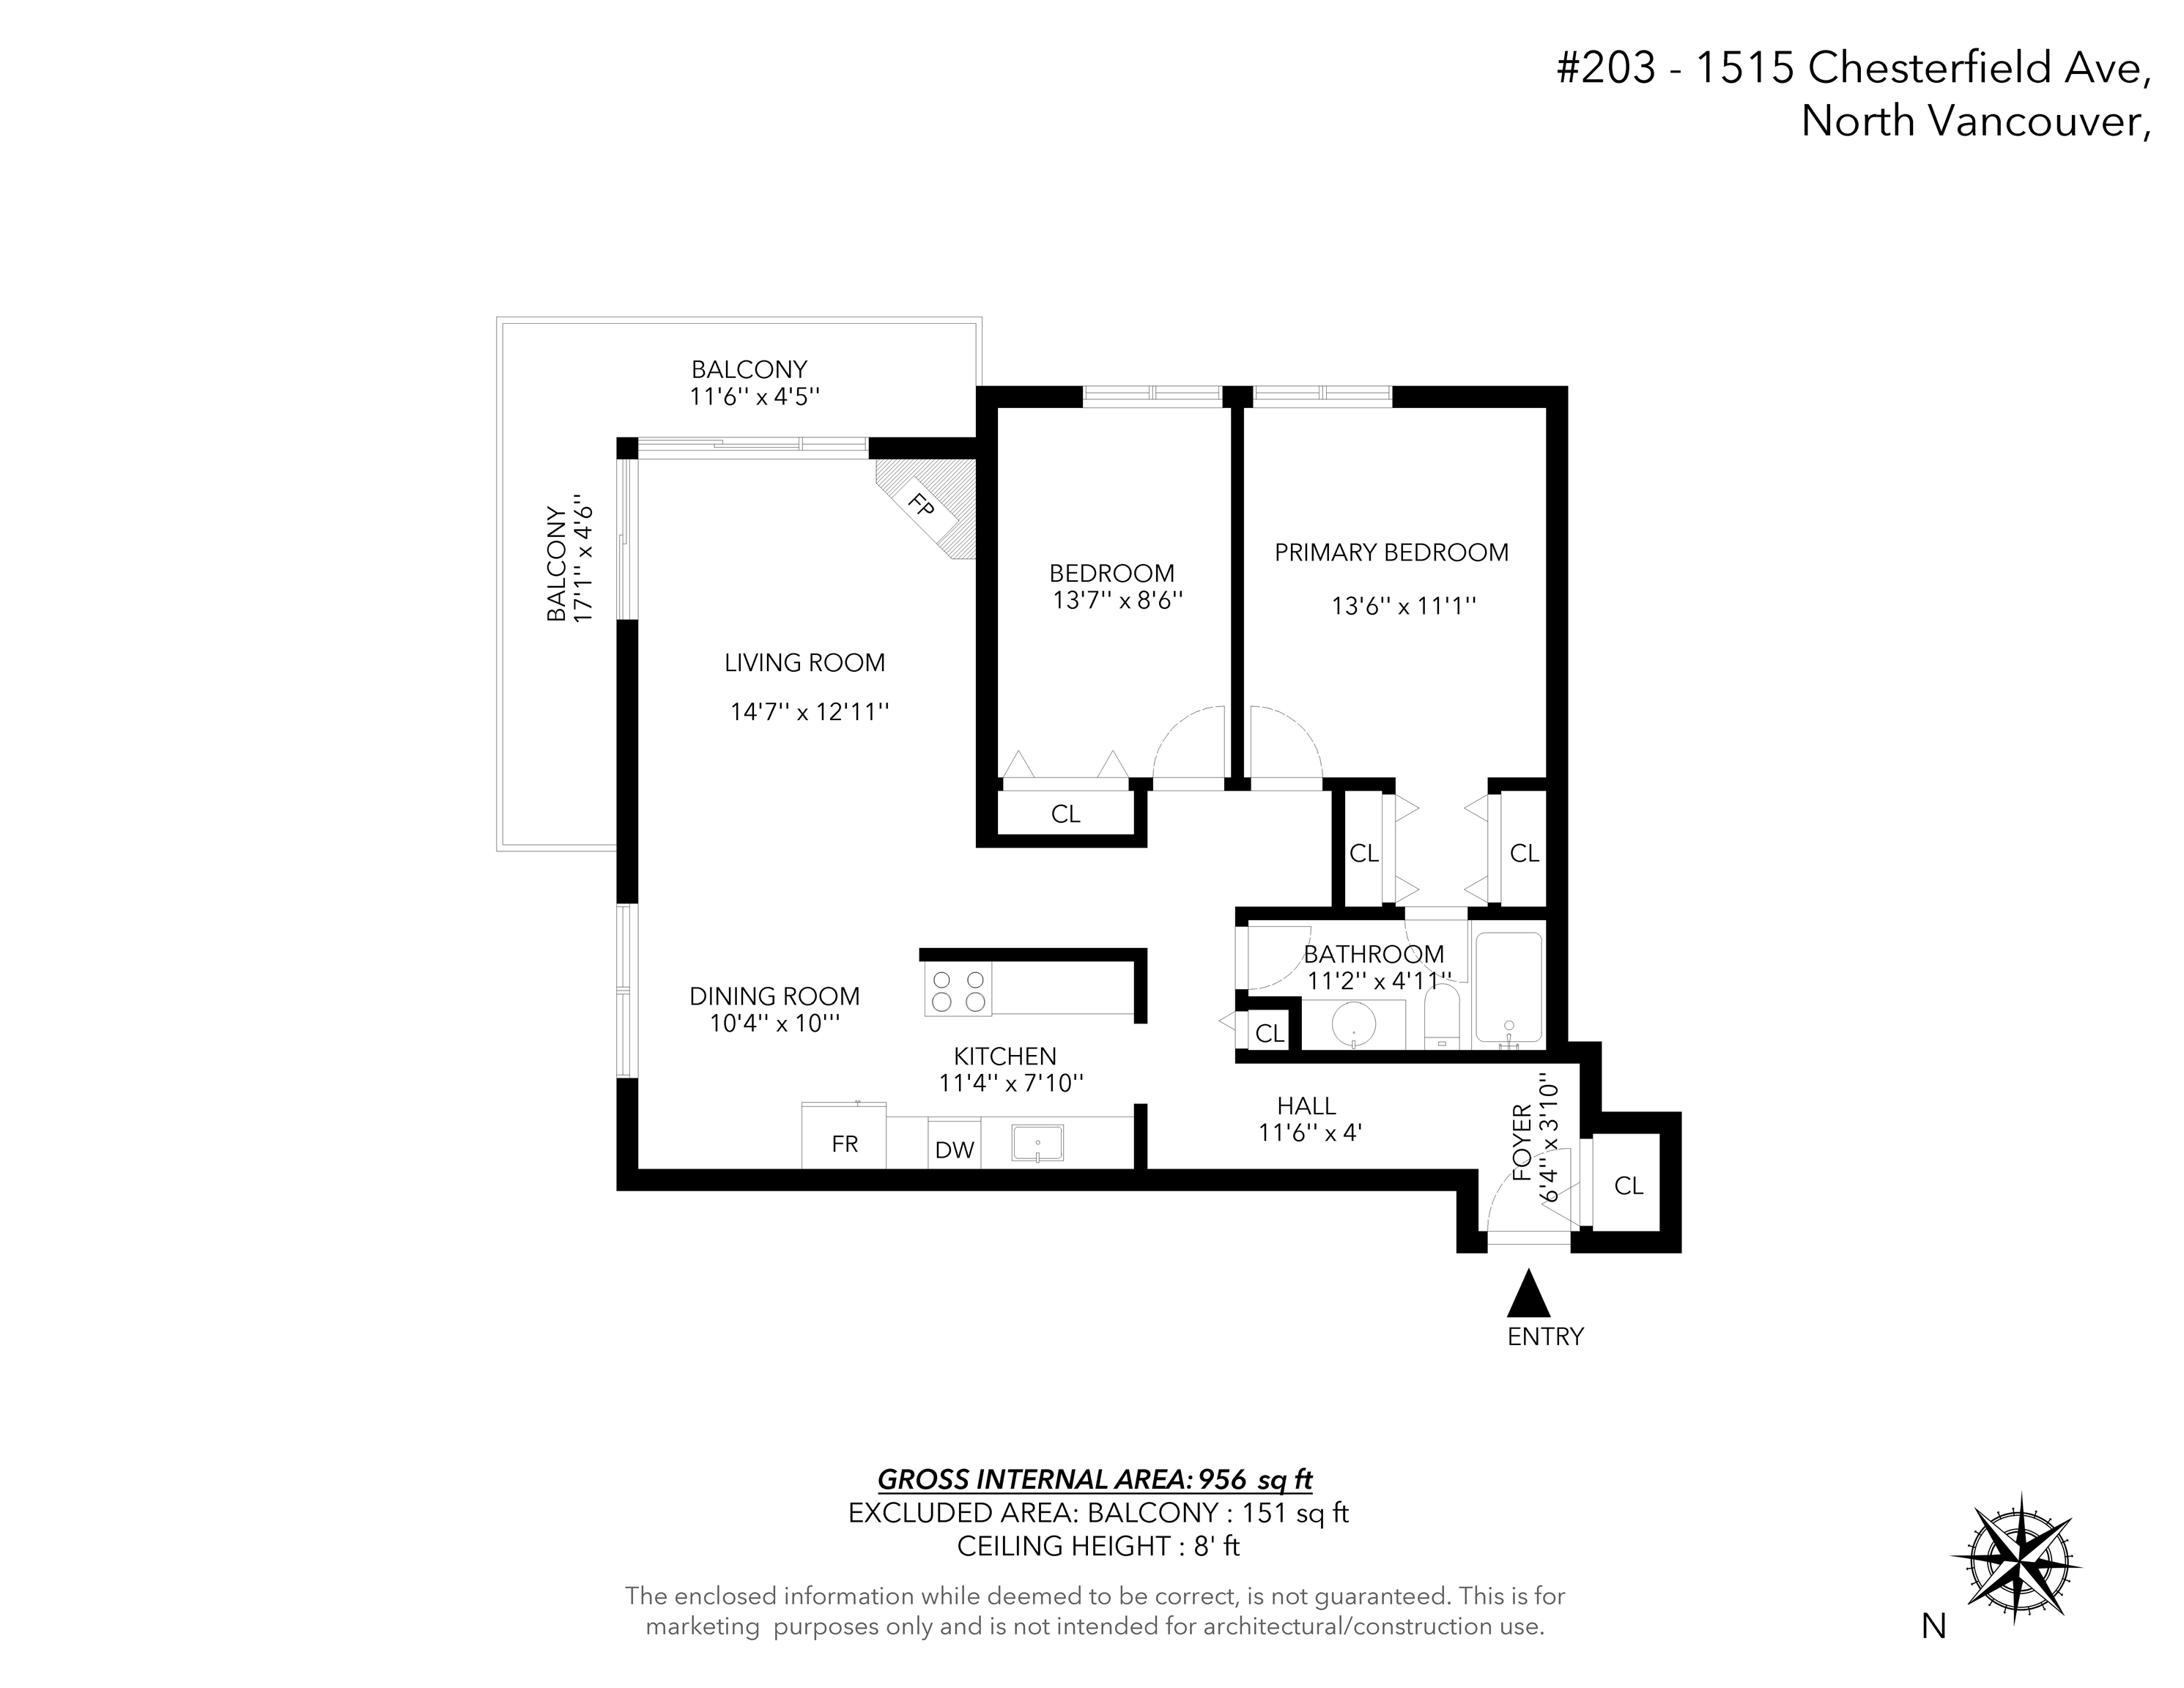 Listing image of 203 1515 CHESTERFIELD AVENUE